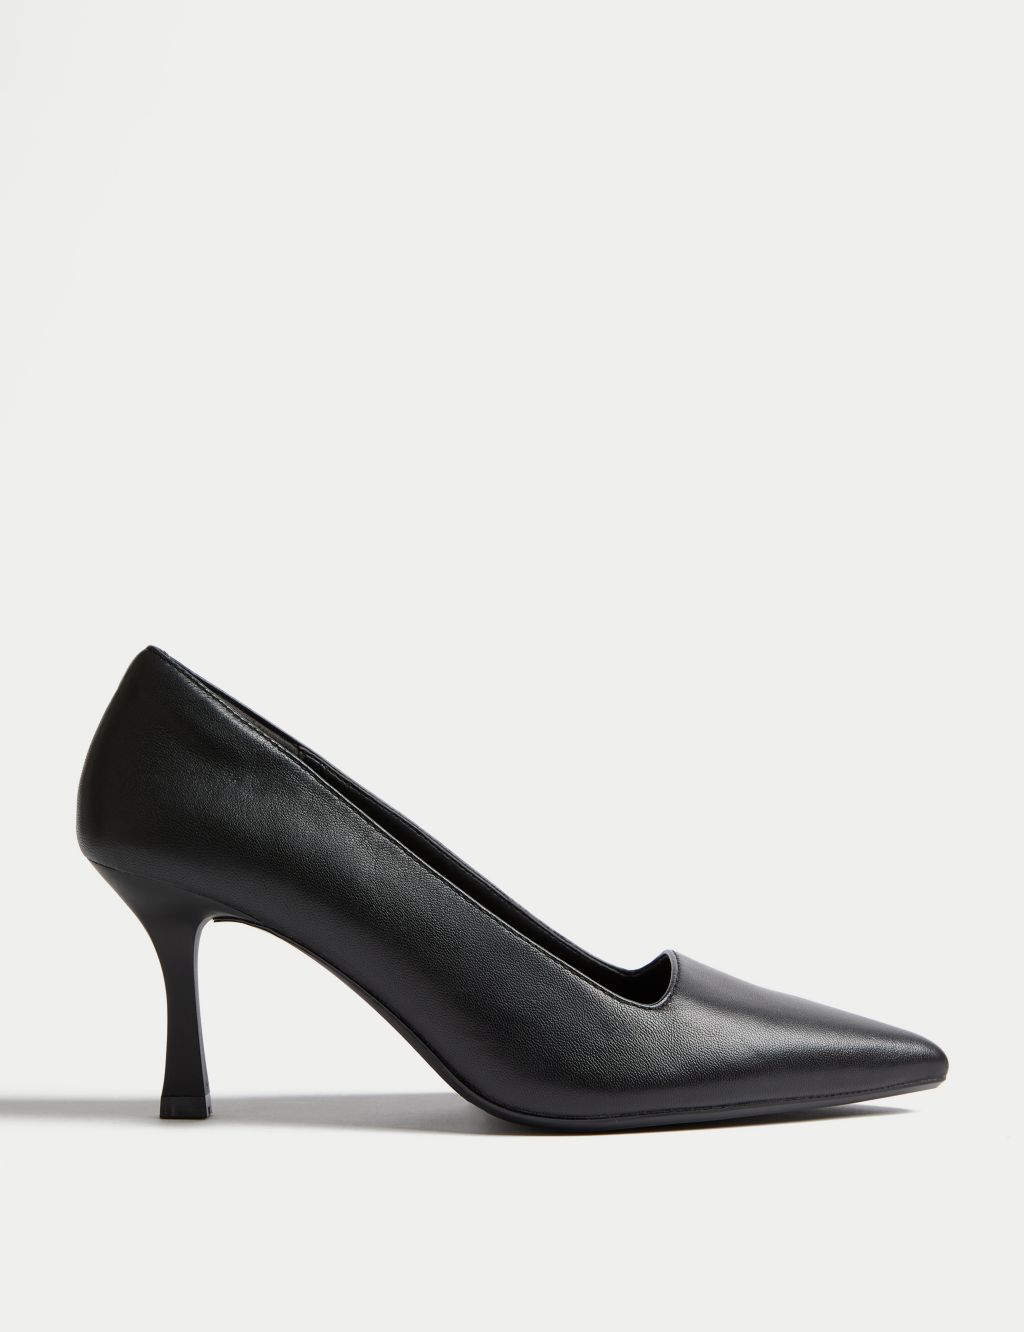 Leather Stiletto Heel Court Shoes 3 of 3